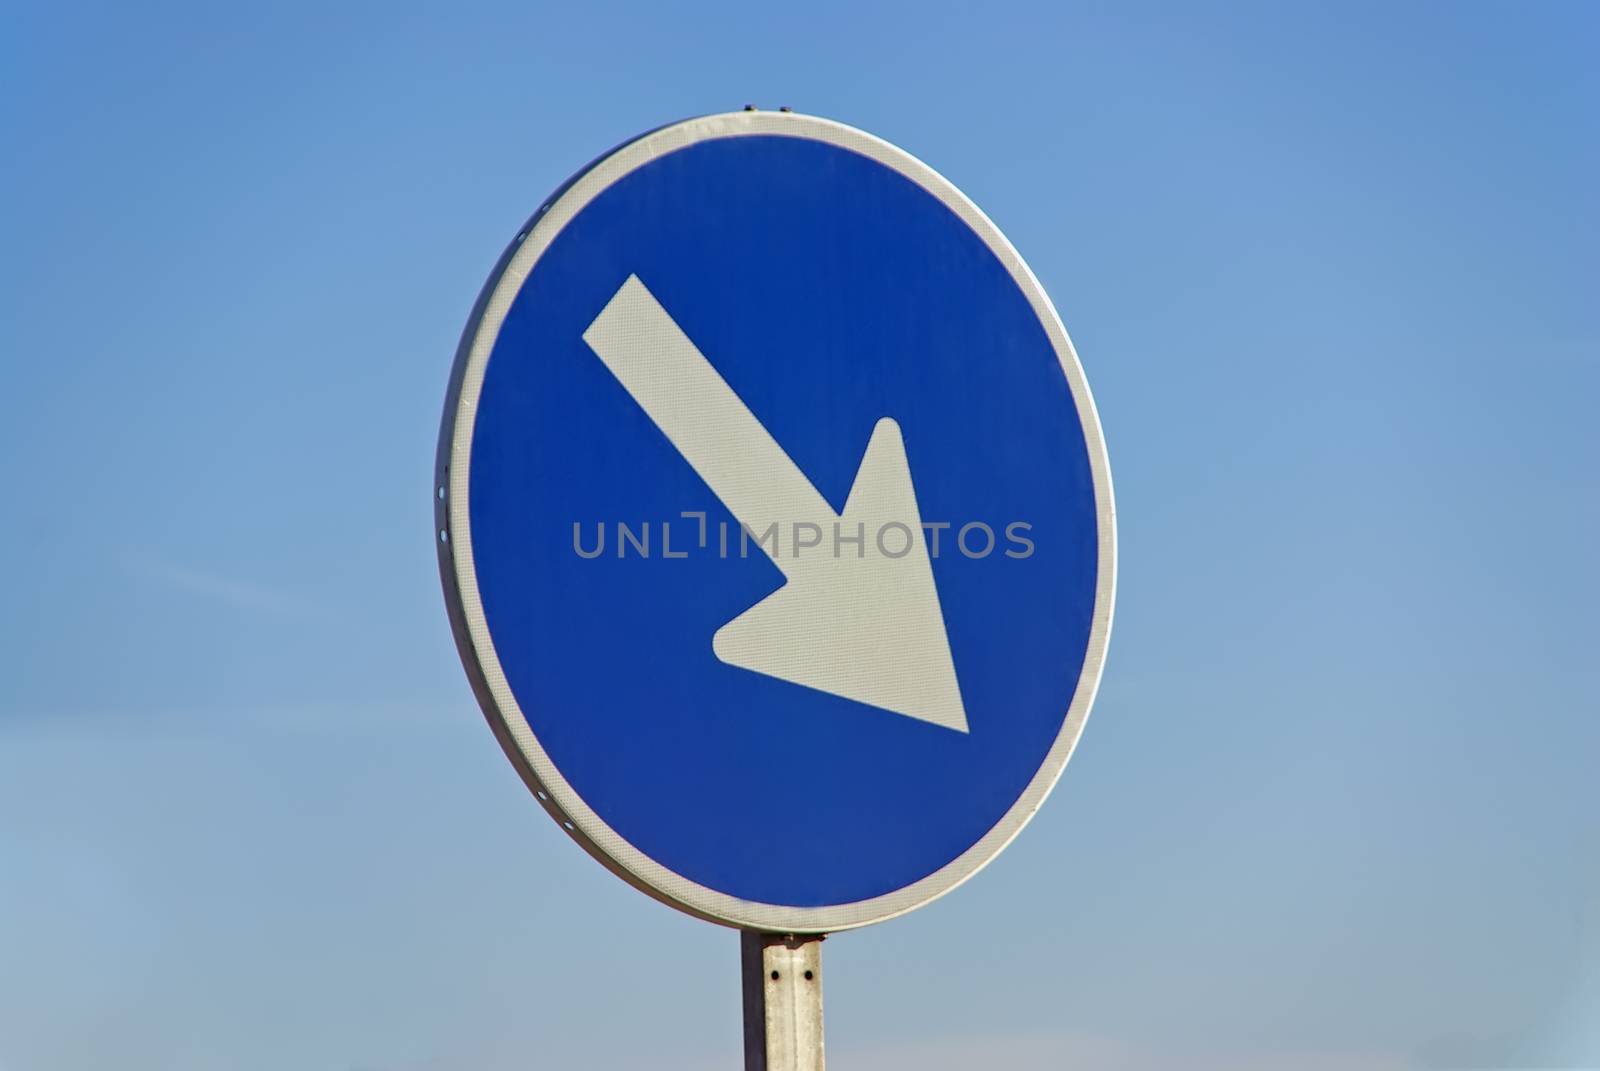 Mandatory road sign indicating "pass on right"